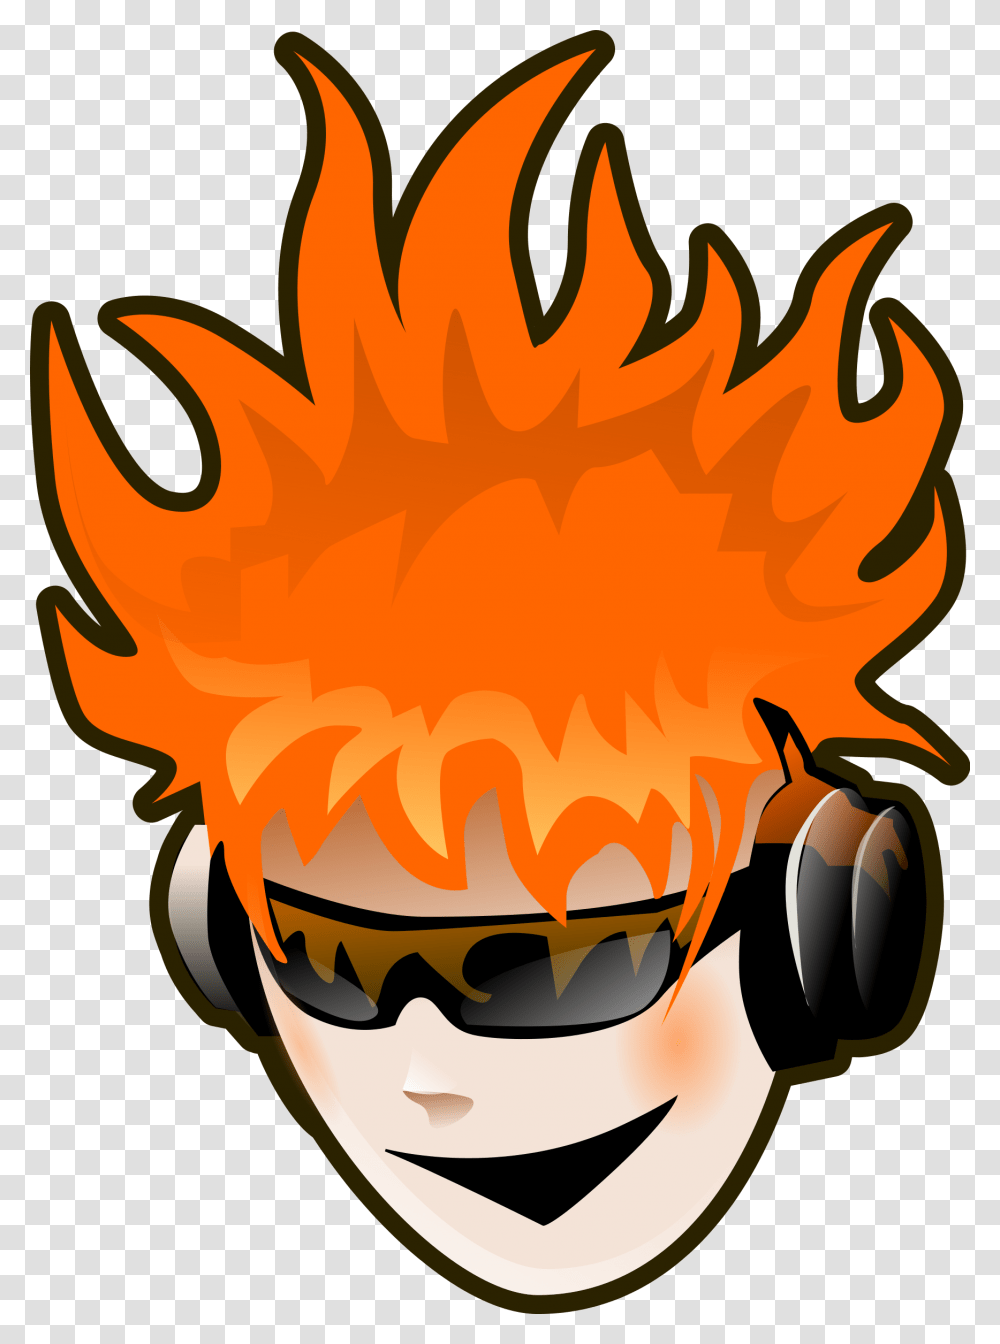 Music Big Image Cartoon Man With Headphone, Fire, Flame, Sunglasses, Accessories Transparent Png